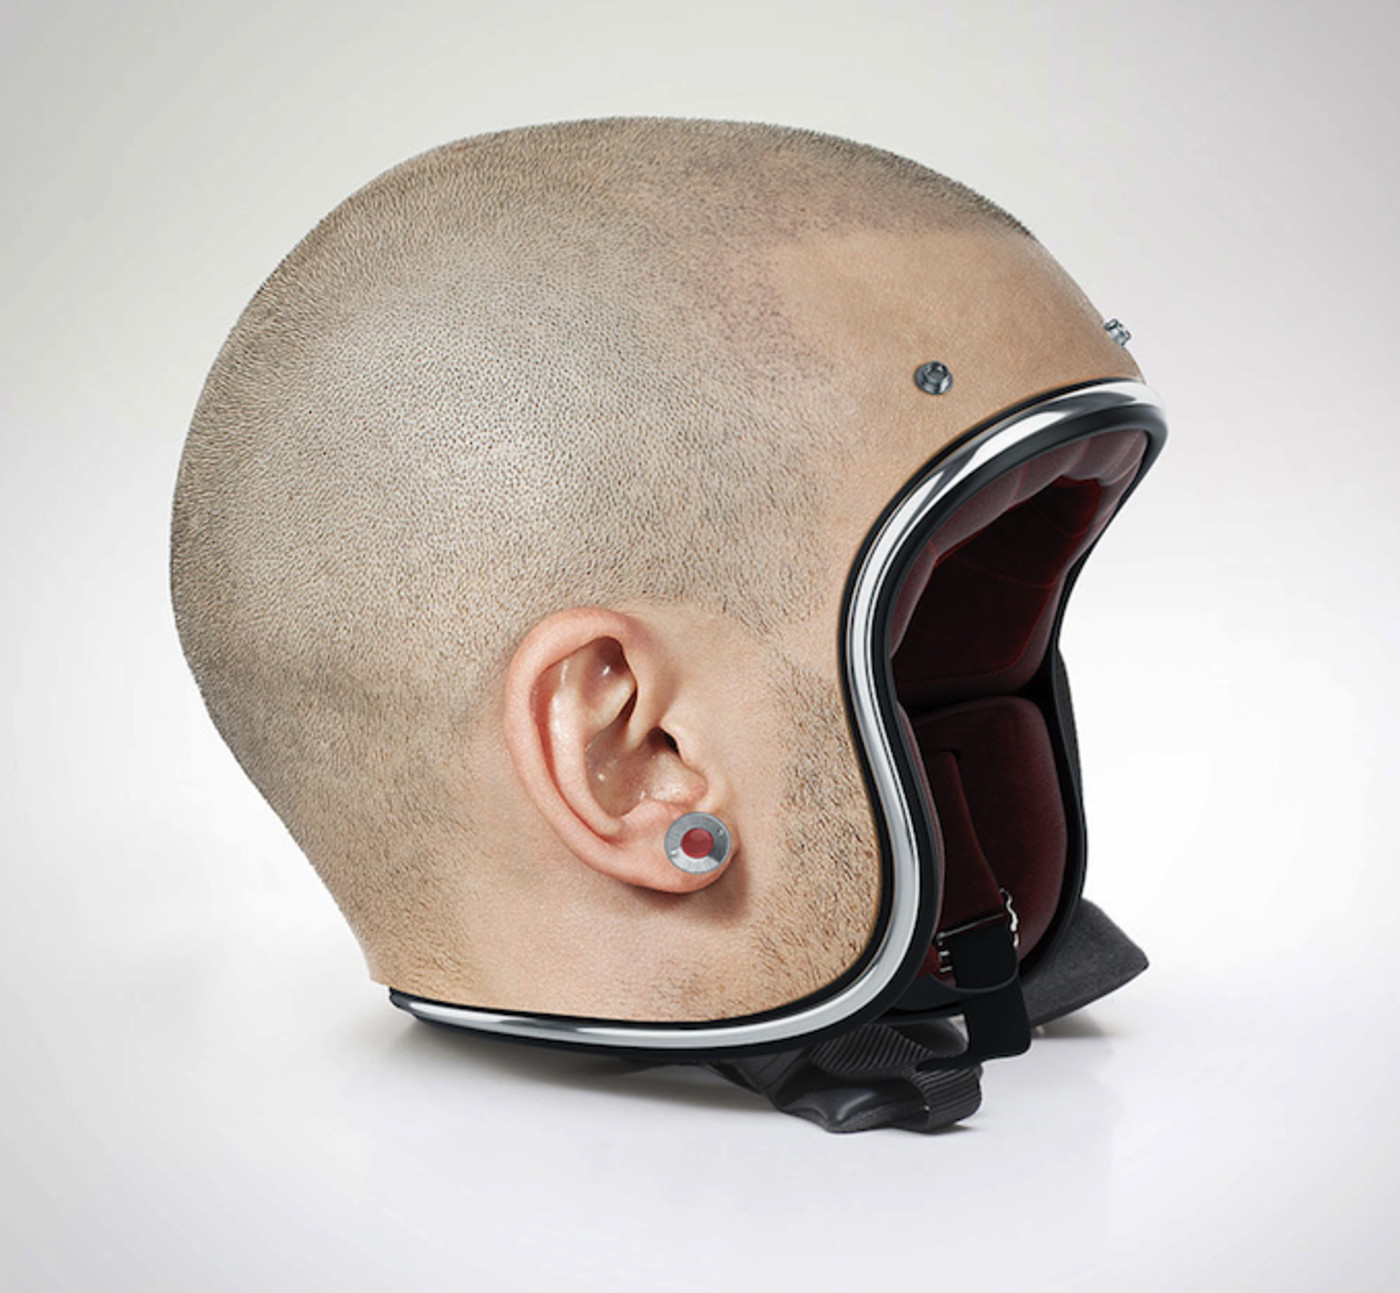 Shocking Collections Of motorcycle helmet head shapes Images